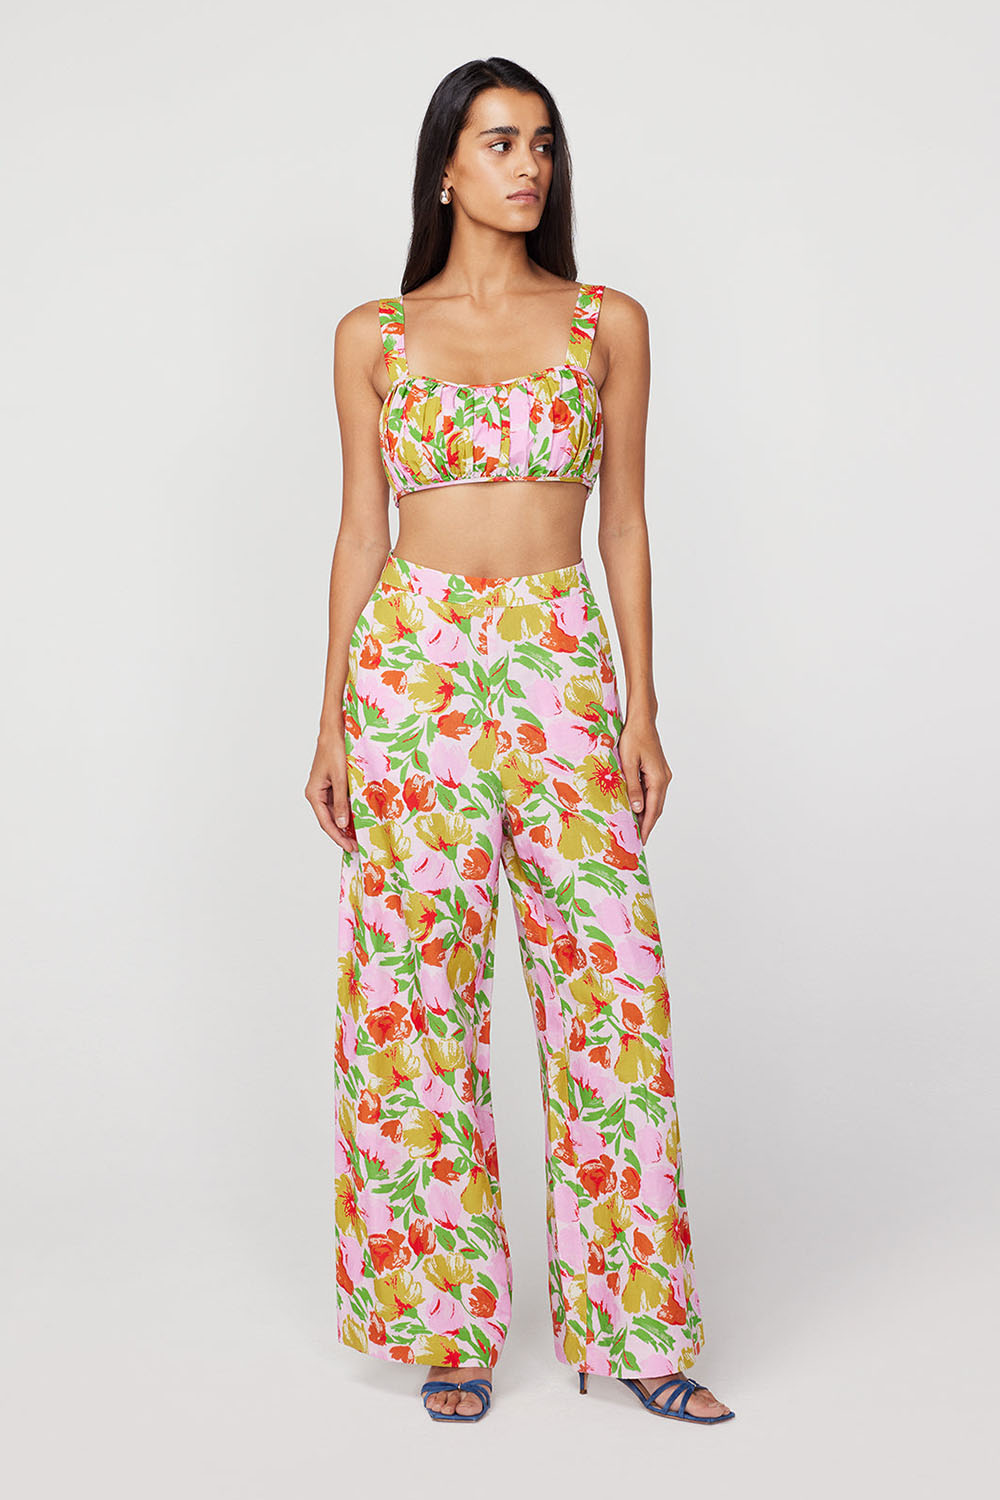 Kitri Angelina floral trousers